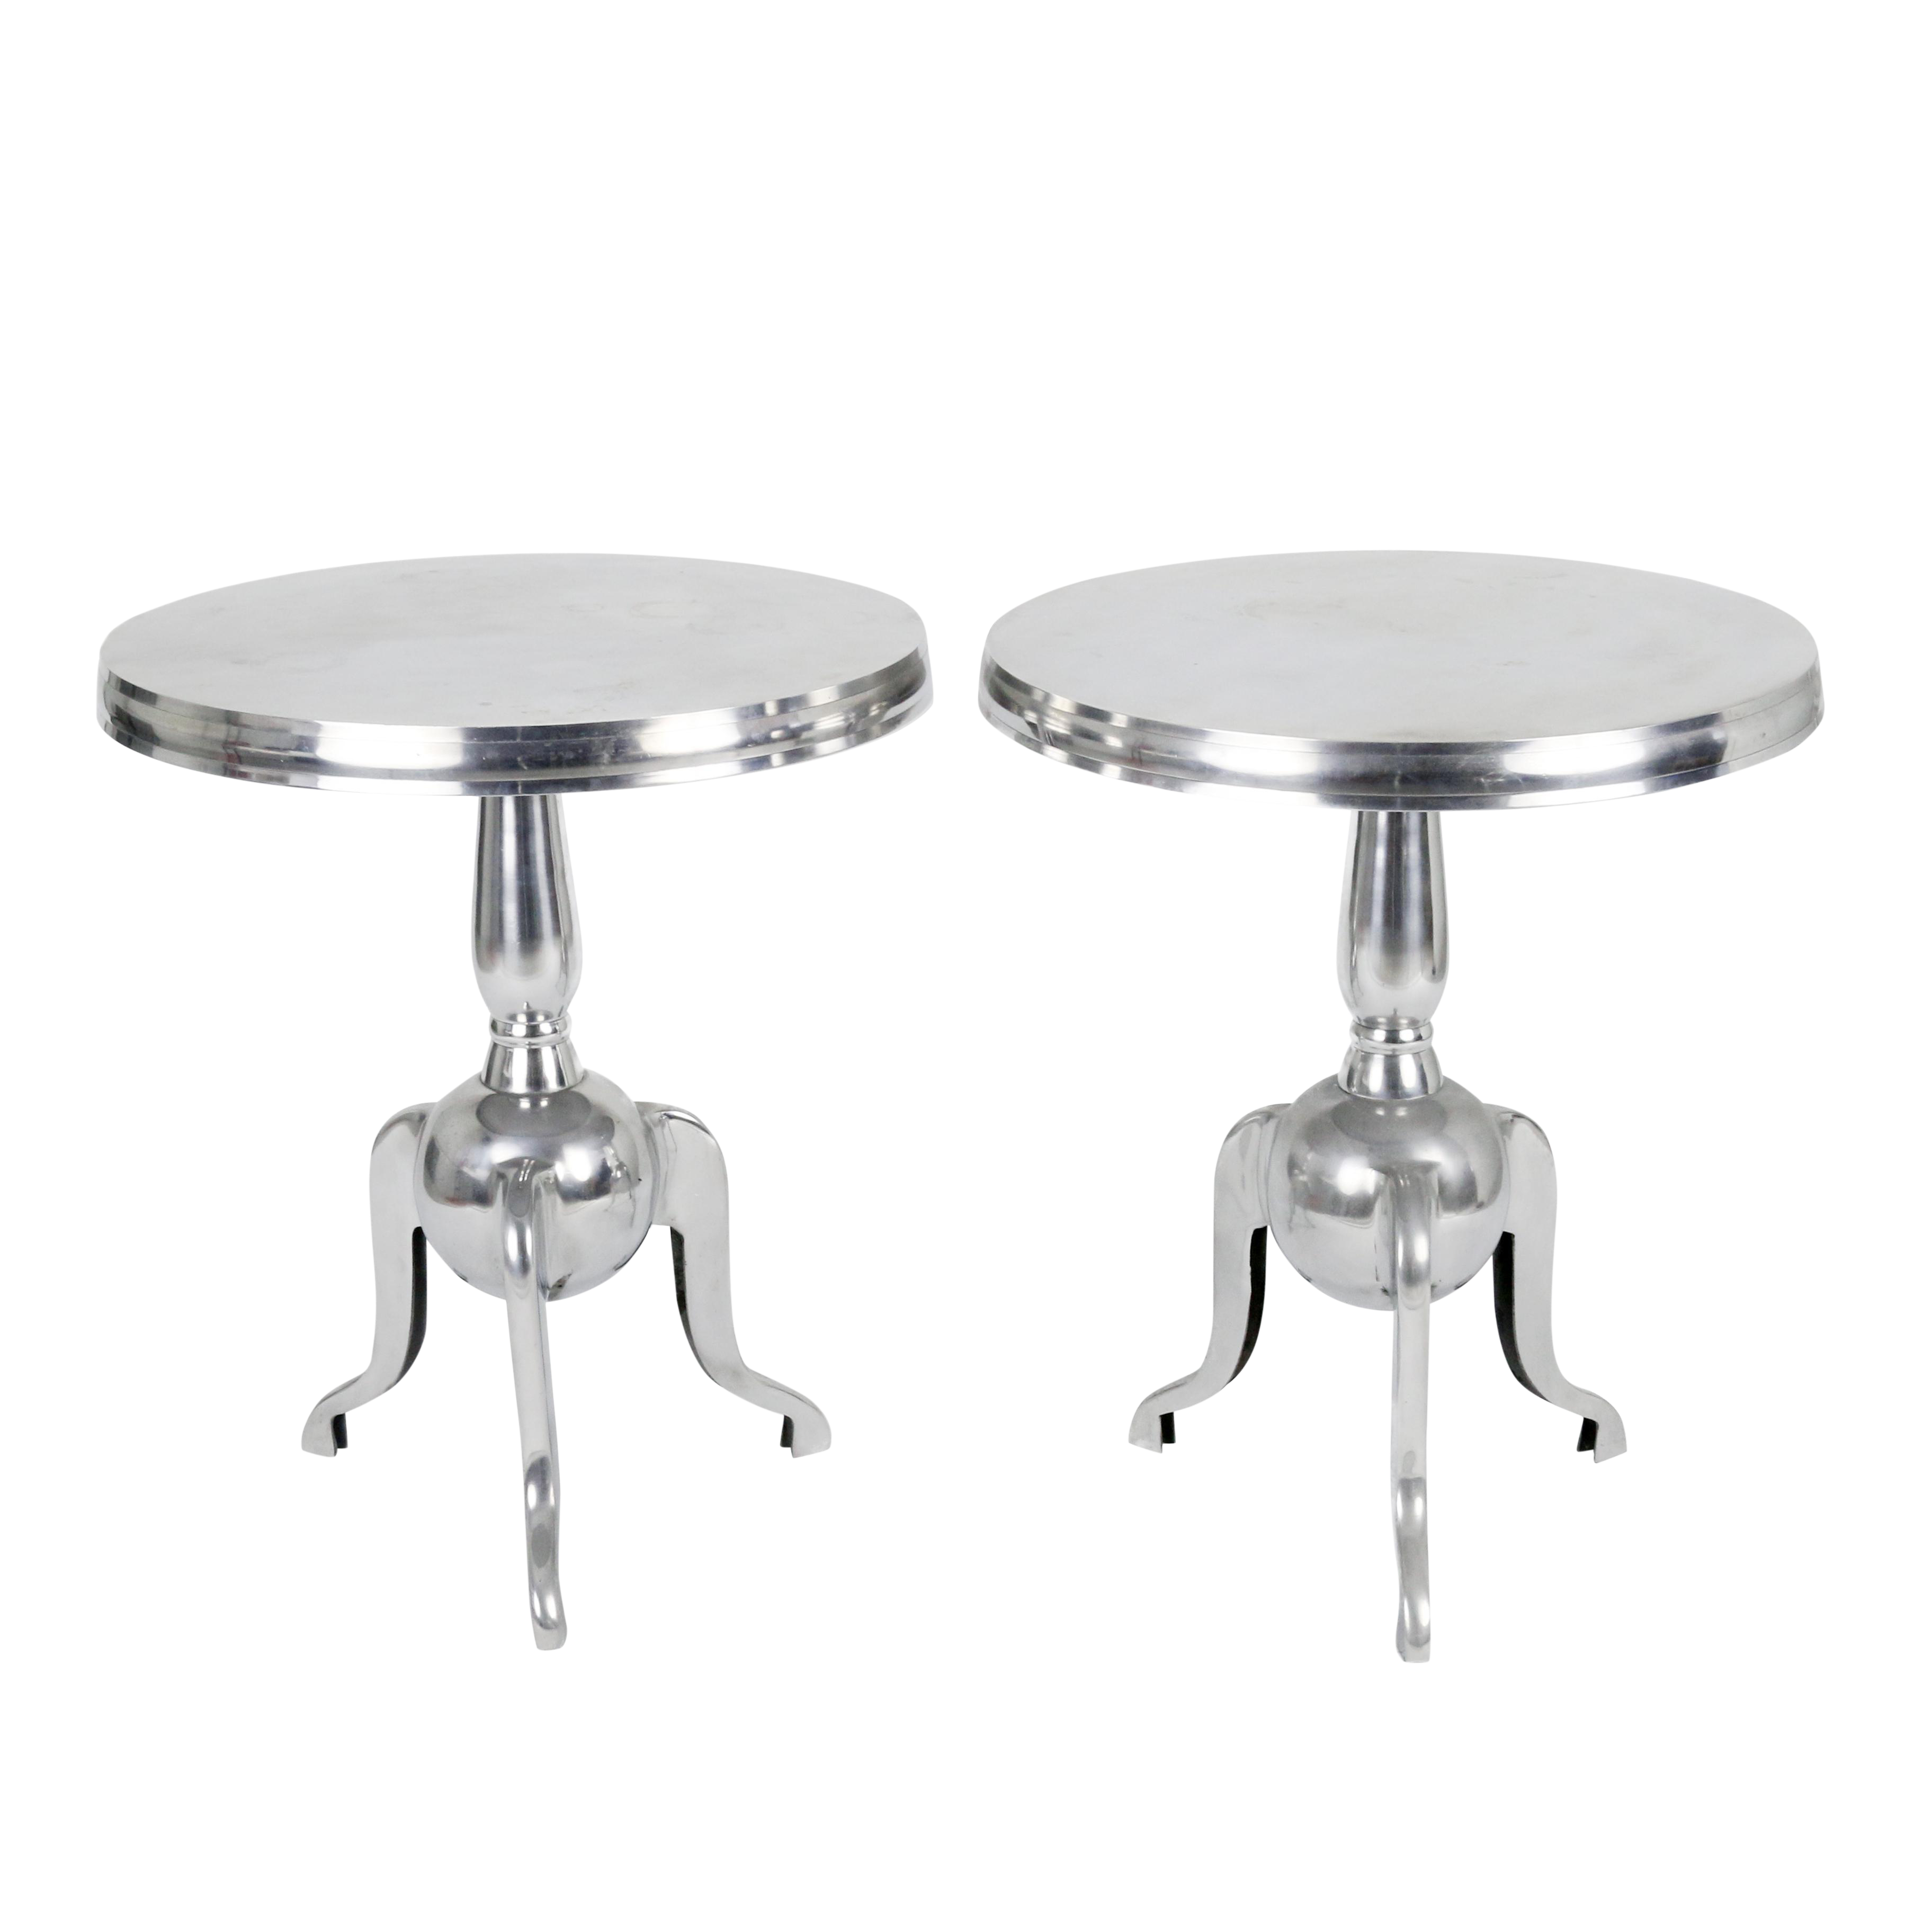 pottery barn silver aluminum pedestal accent tables pair chairish large outdoor pool umbrellas seashell lamp old coffee table card tablecloth half side oak floor threshold west